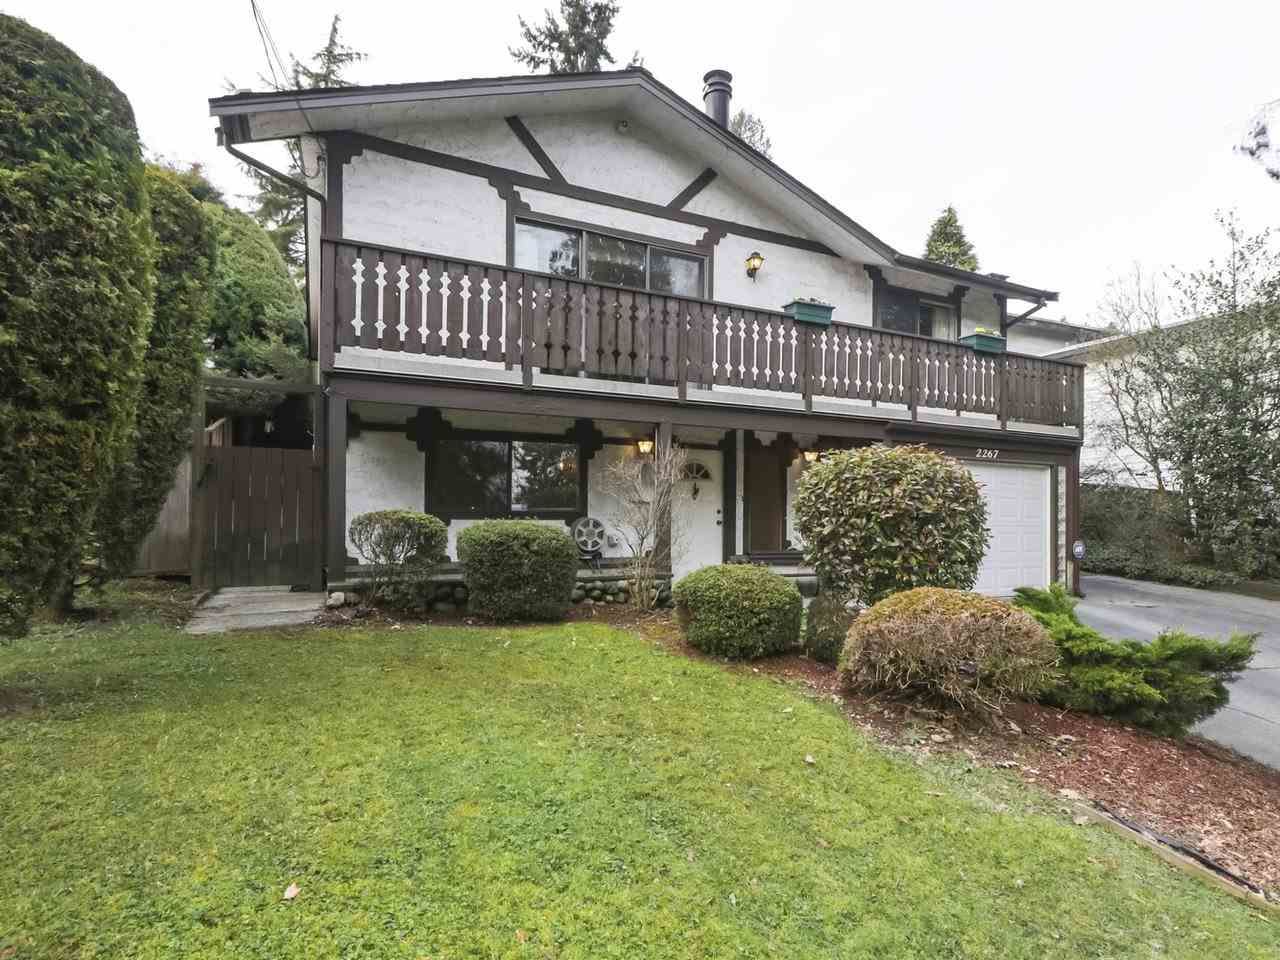 Main Photo: 2267 CAPE HORN AVENUE in Coquitlam: Cape Horn House for sale : MLS®# R2439351